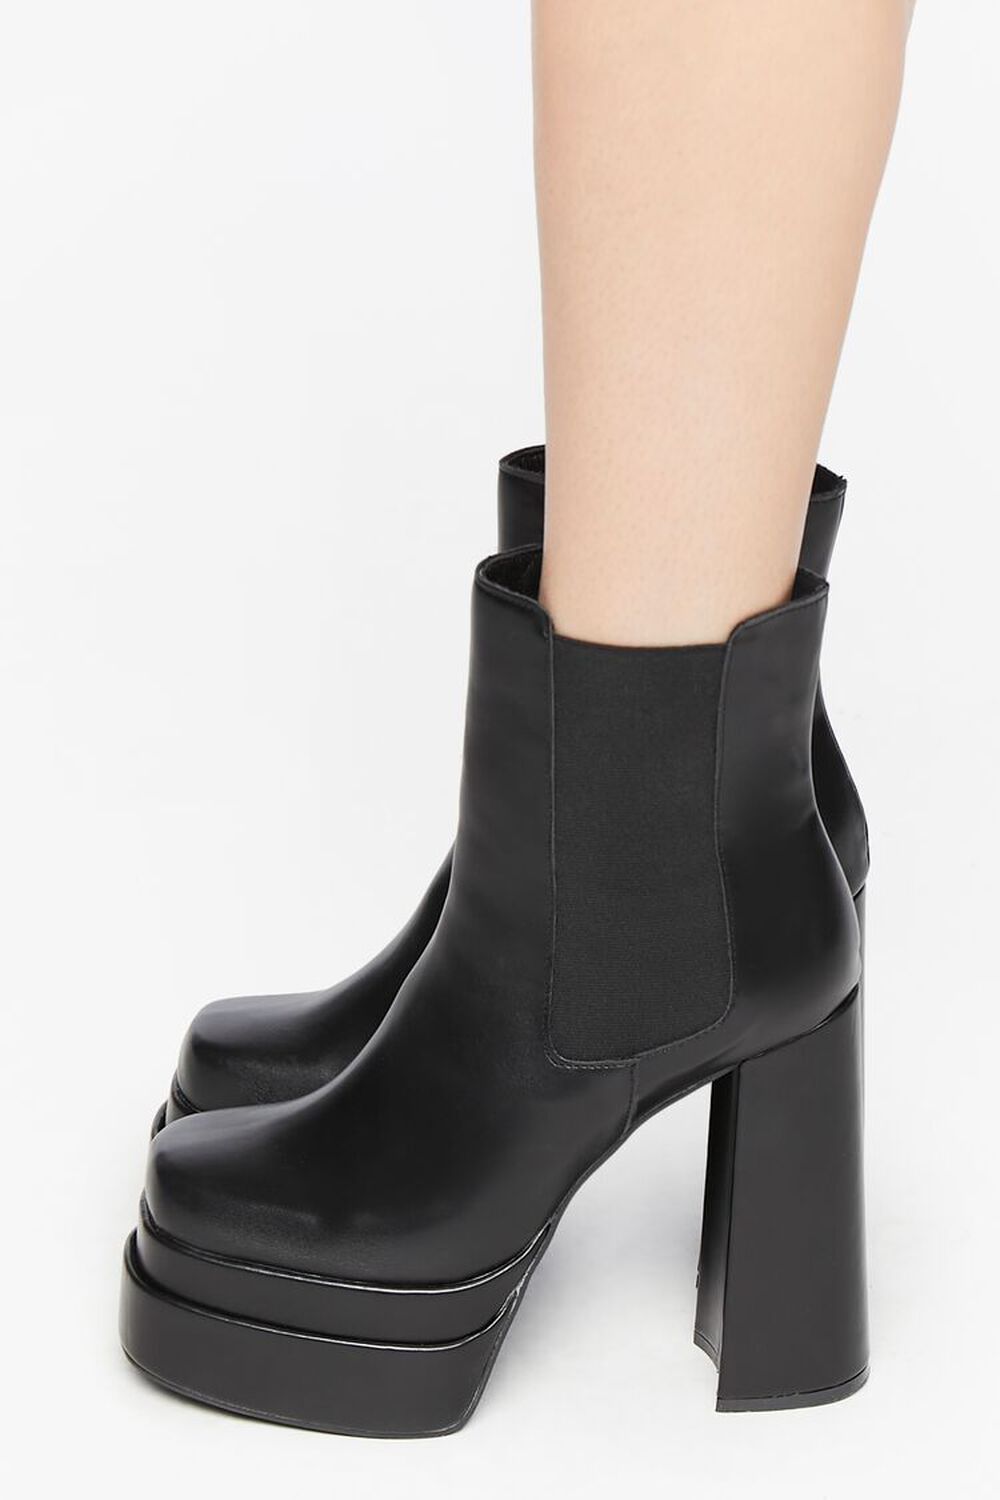 BLACK Faux Leather Stacked Platform Booties, image 2